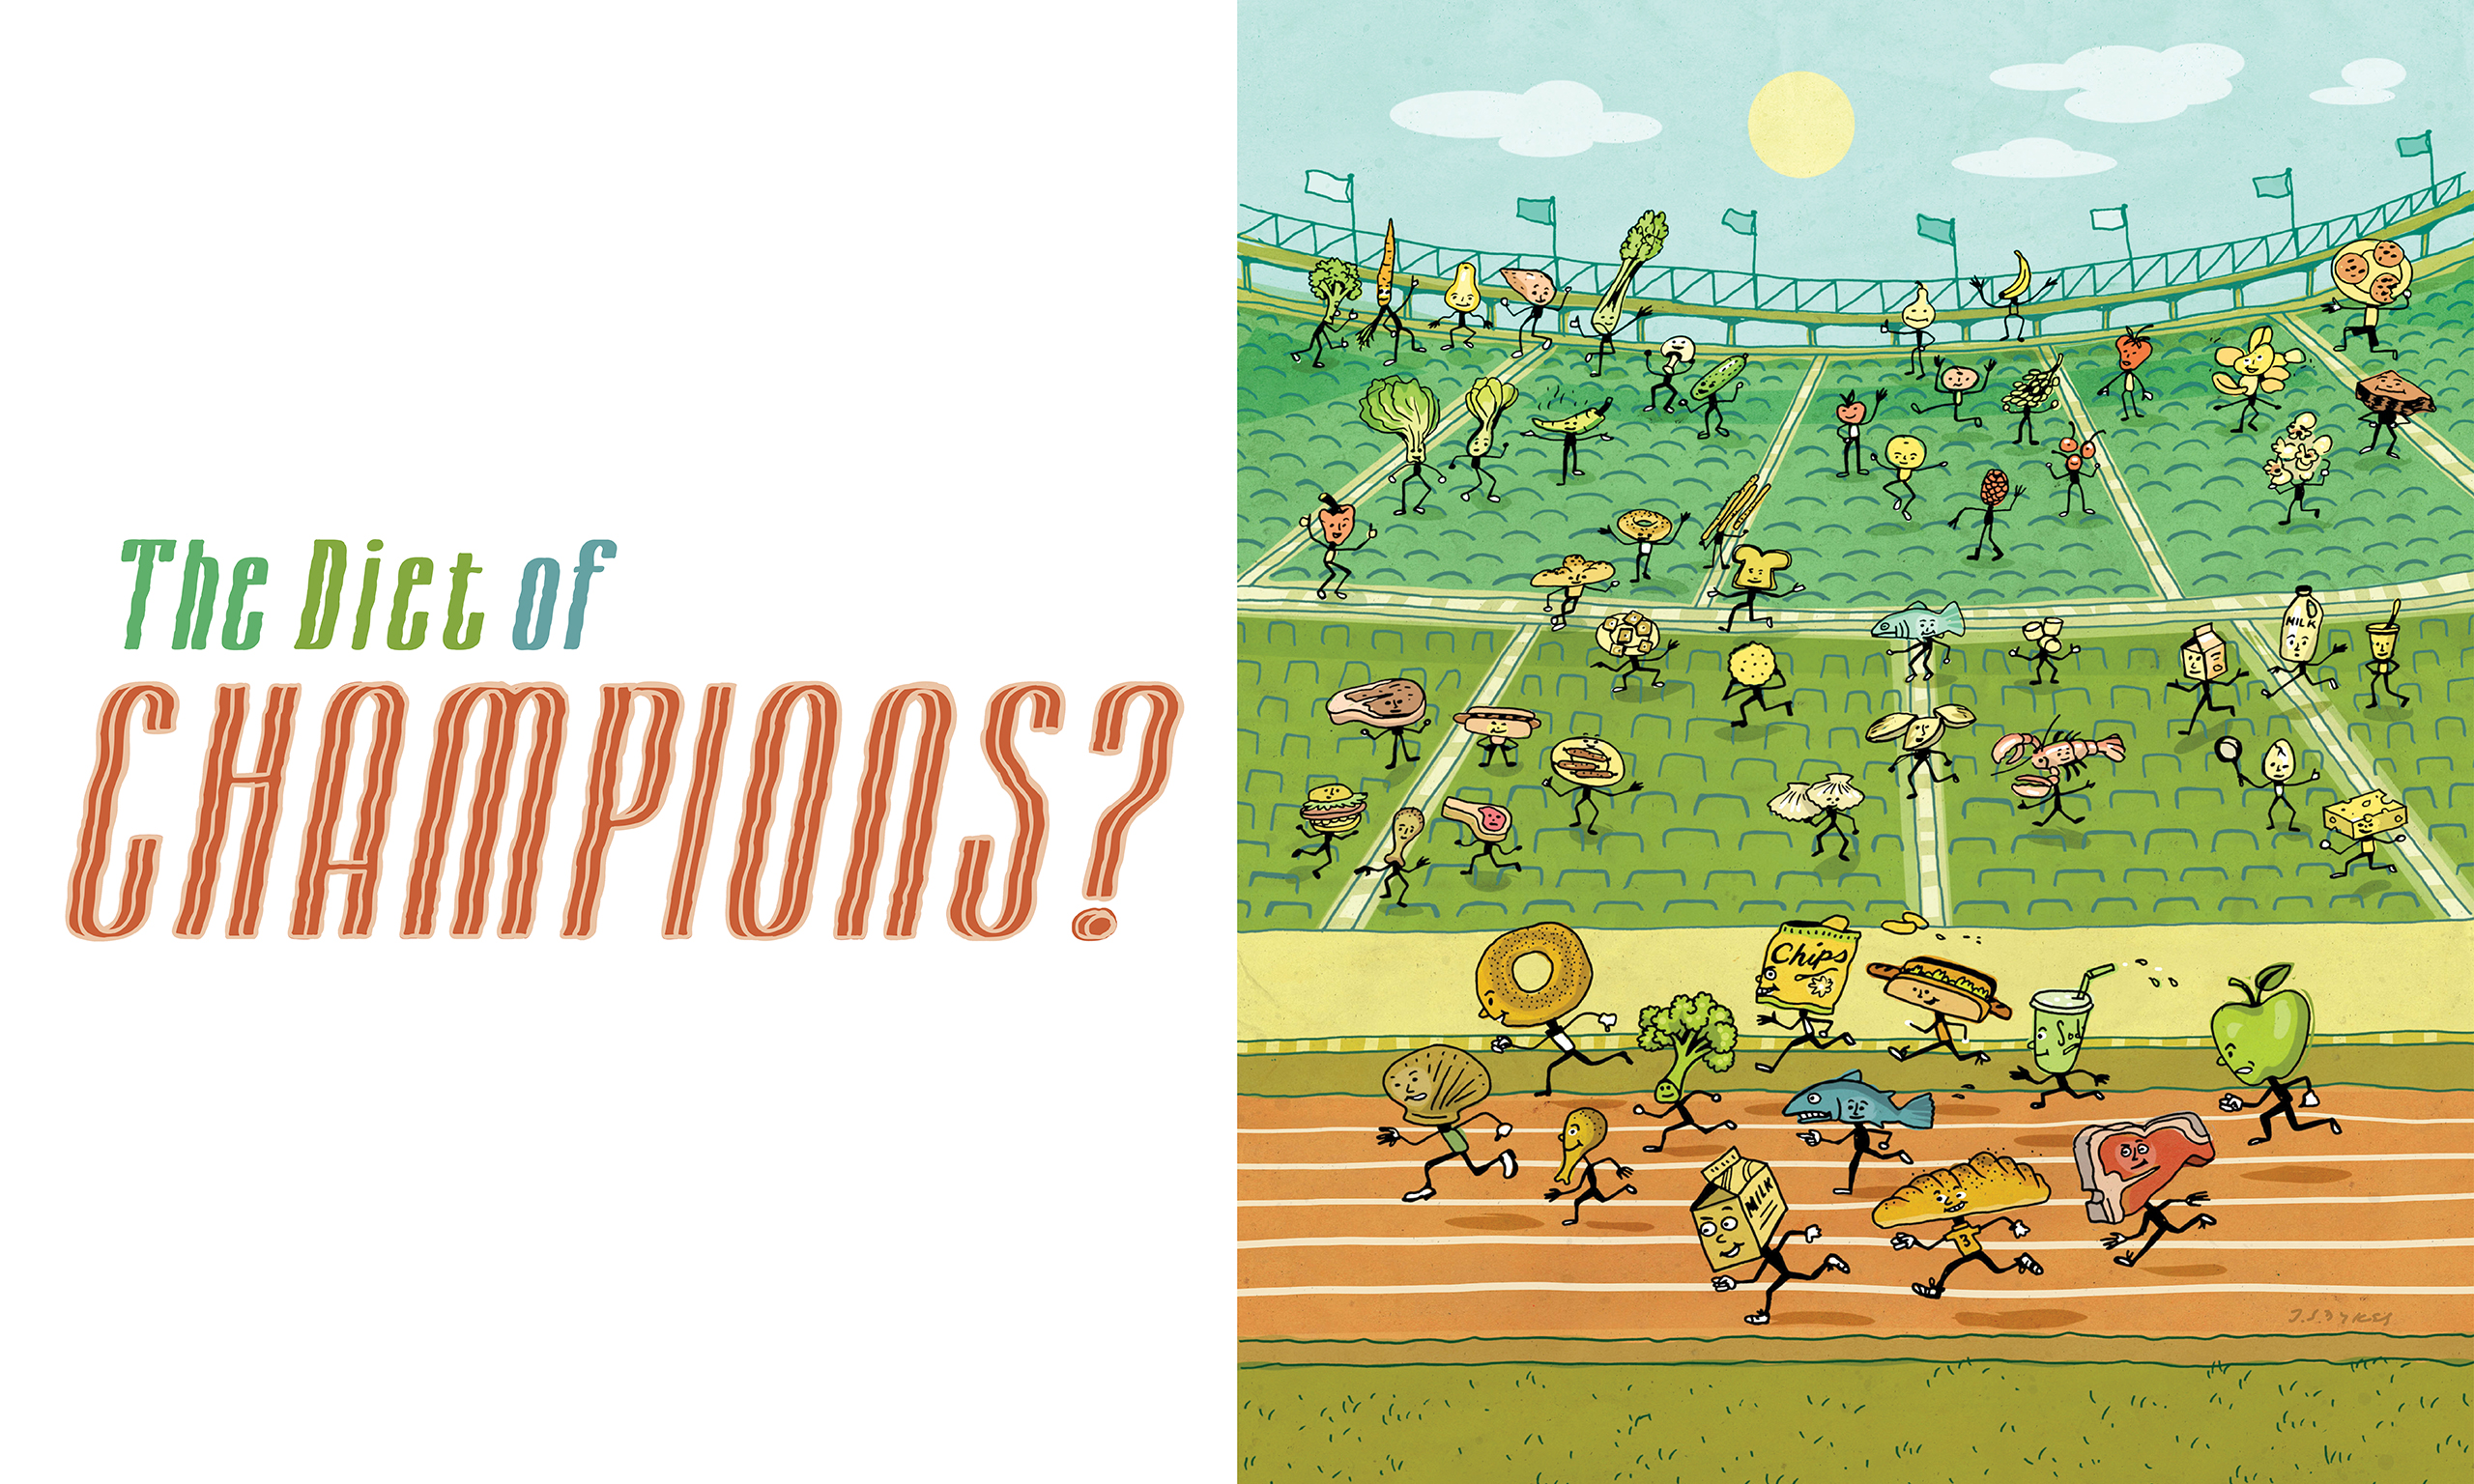 Title image for article "The Diet of Champions?" with an illustration of different kinds of foods in a race. 